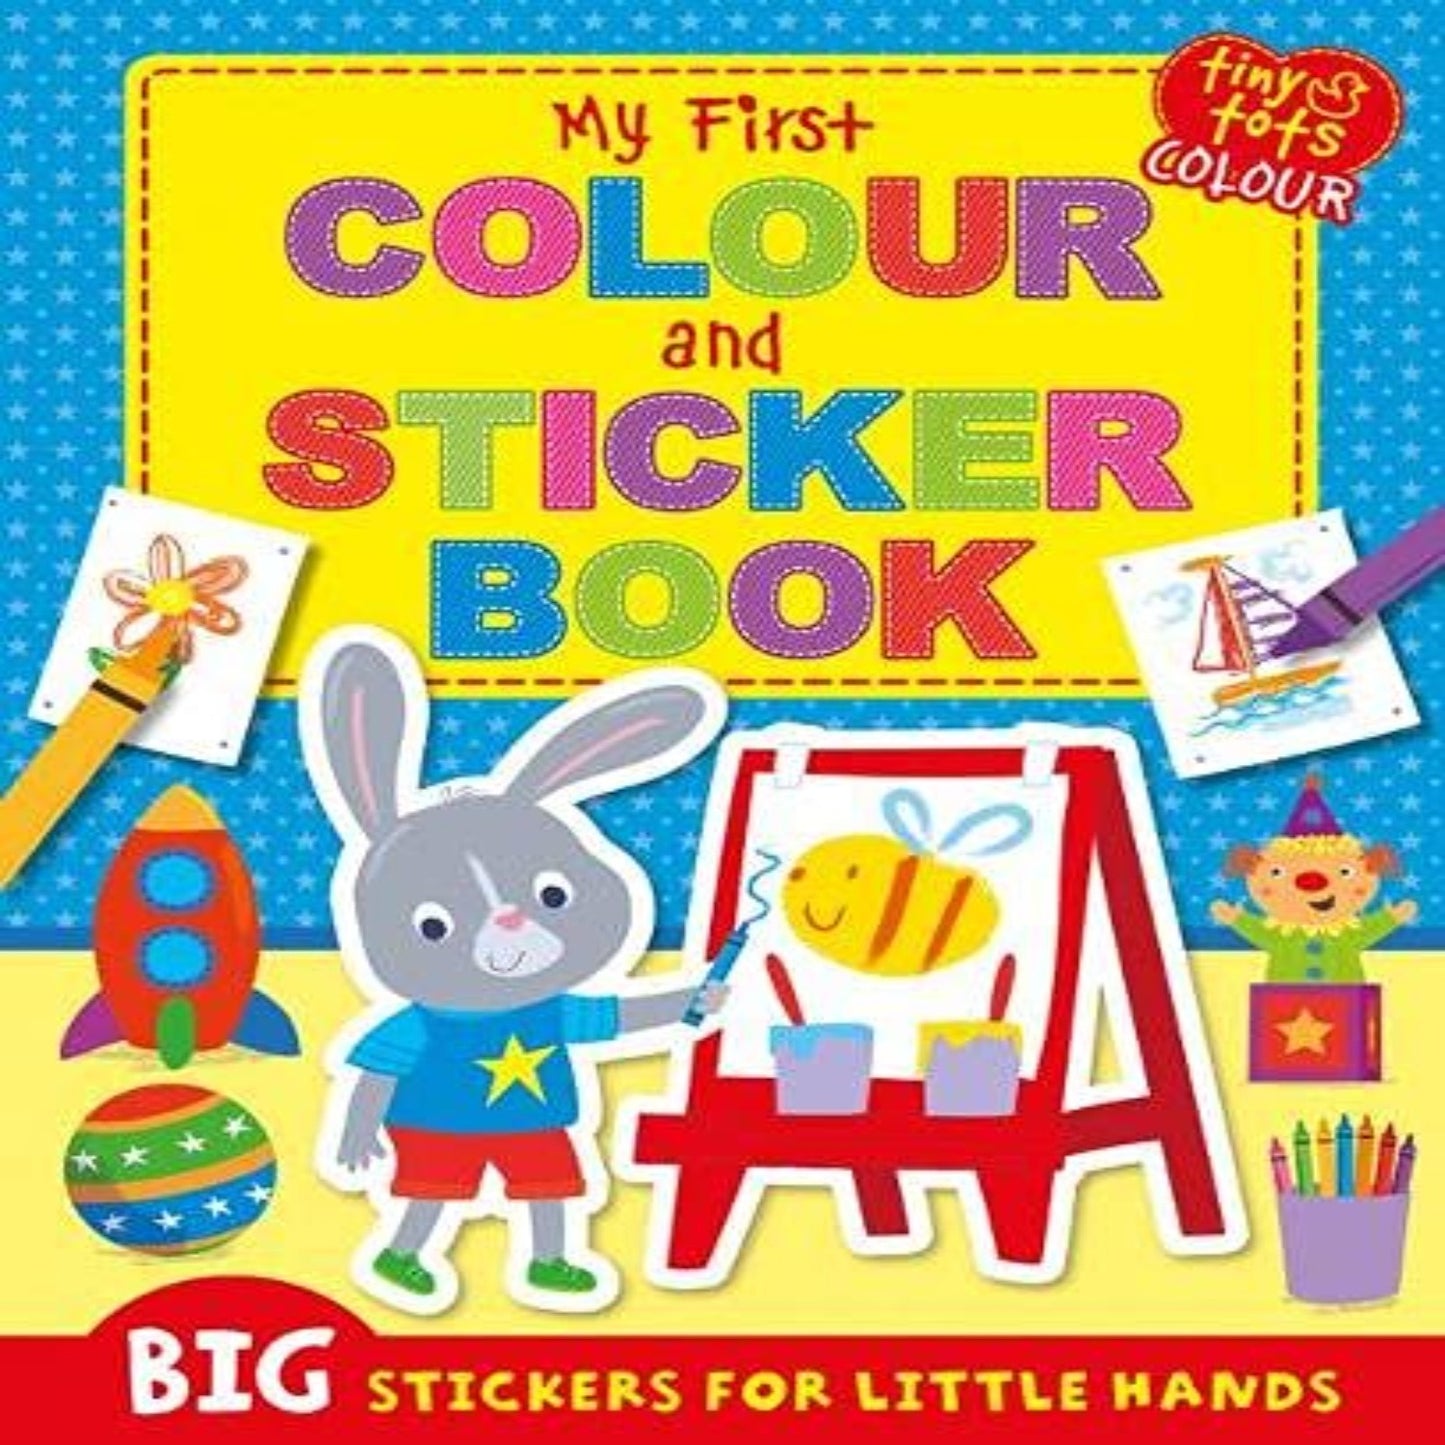 My First Colour and Sticker Book (Tiny Tots Big Sticker Colour) By Parragon Publishing India